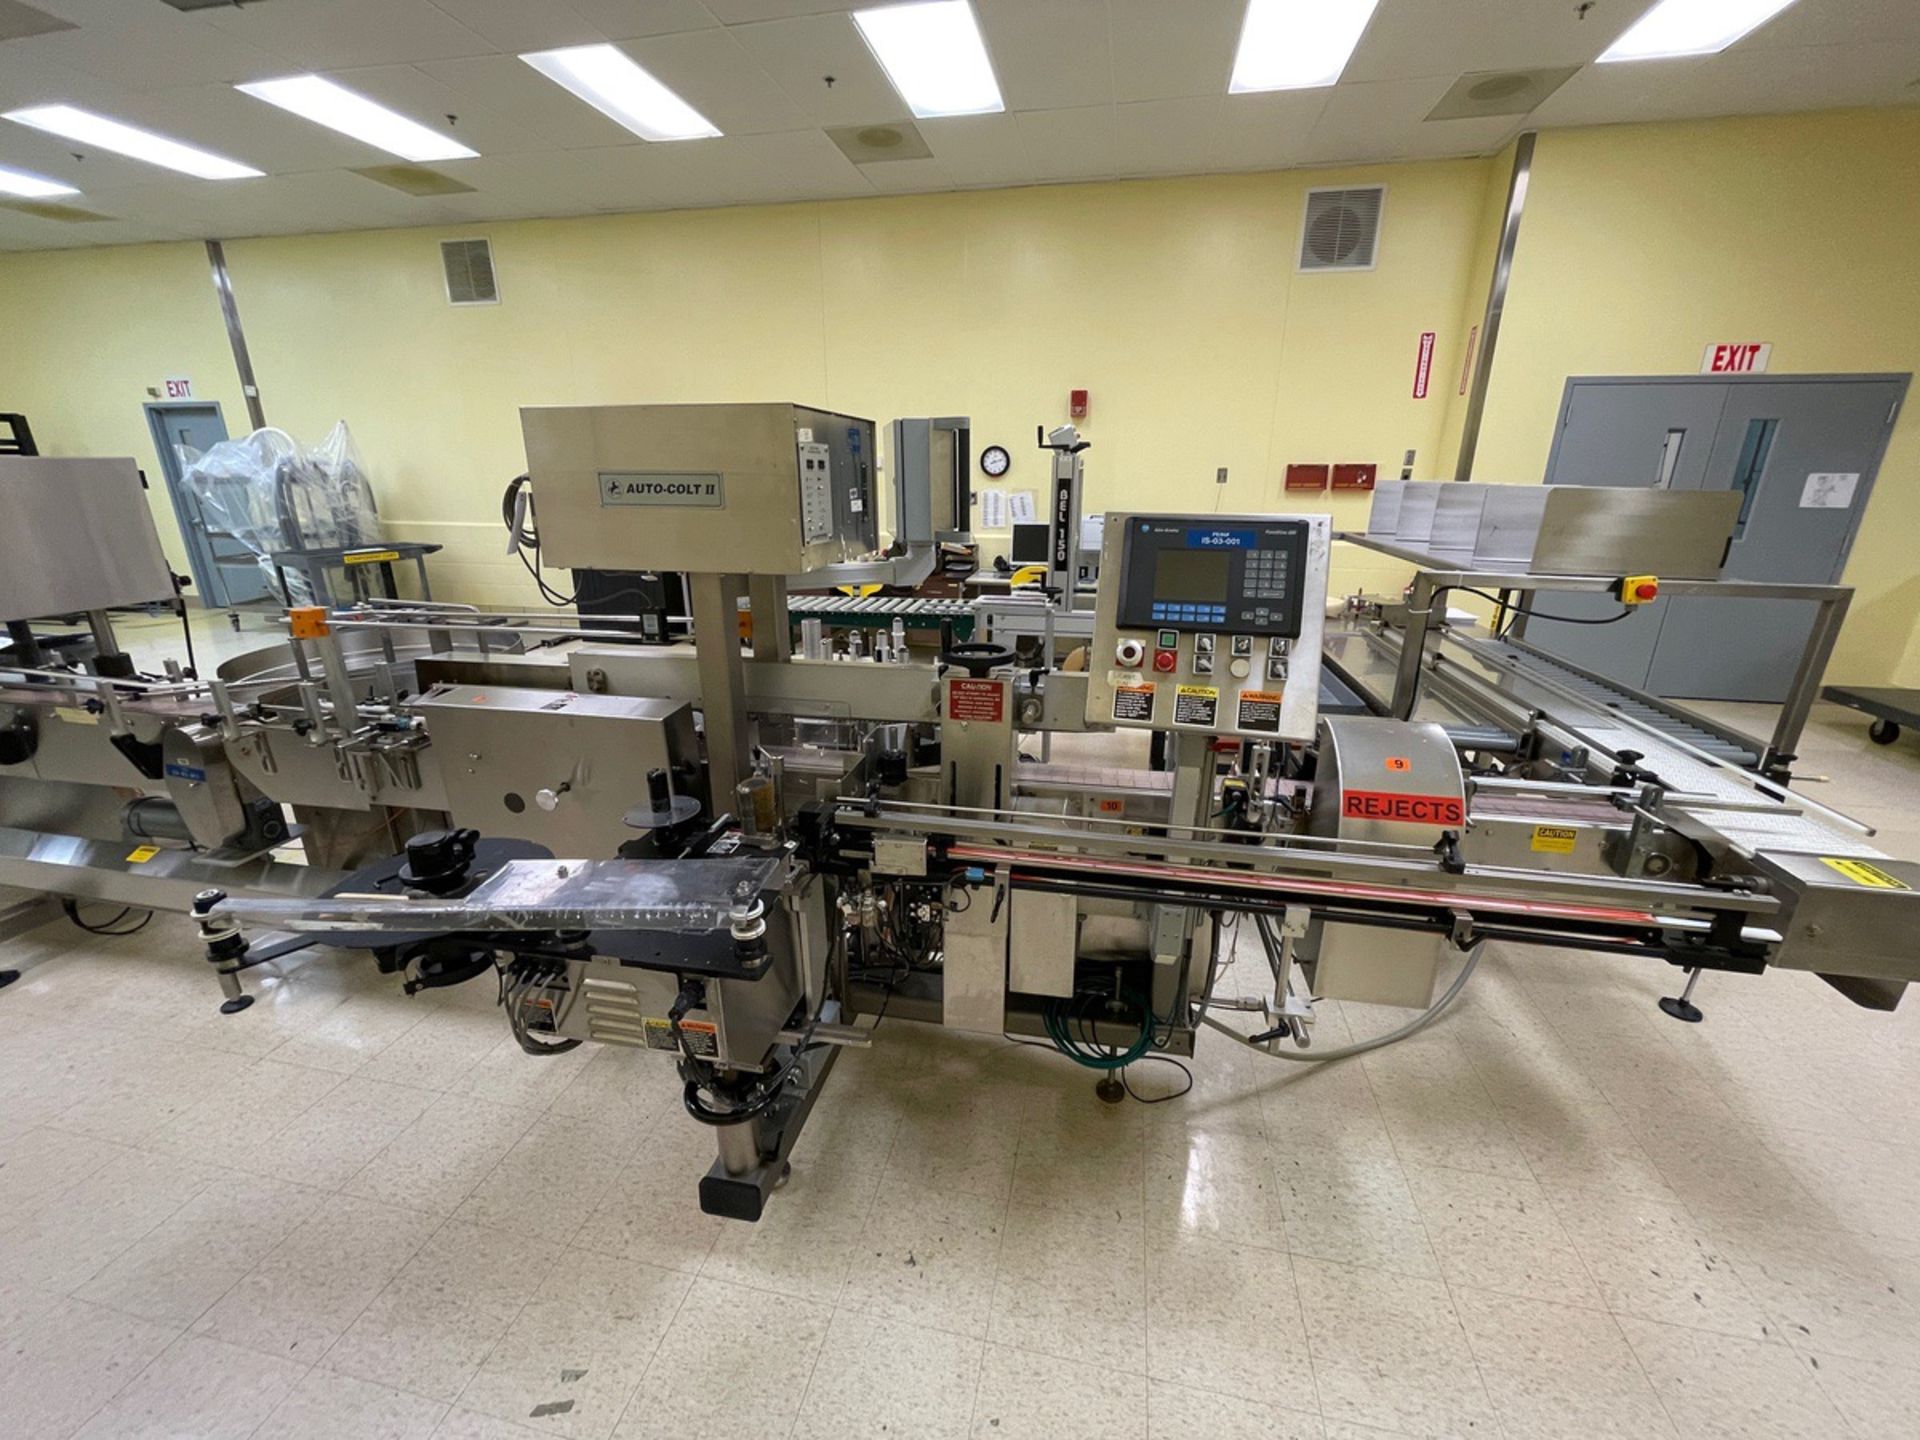 New Jersey NJM Auto-Colt III High Speed Pressure Sensitive Labeler - Subj to Bulk | Rig Fee: $850 - Image 3 of 16